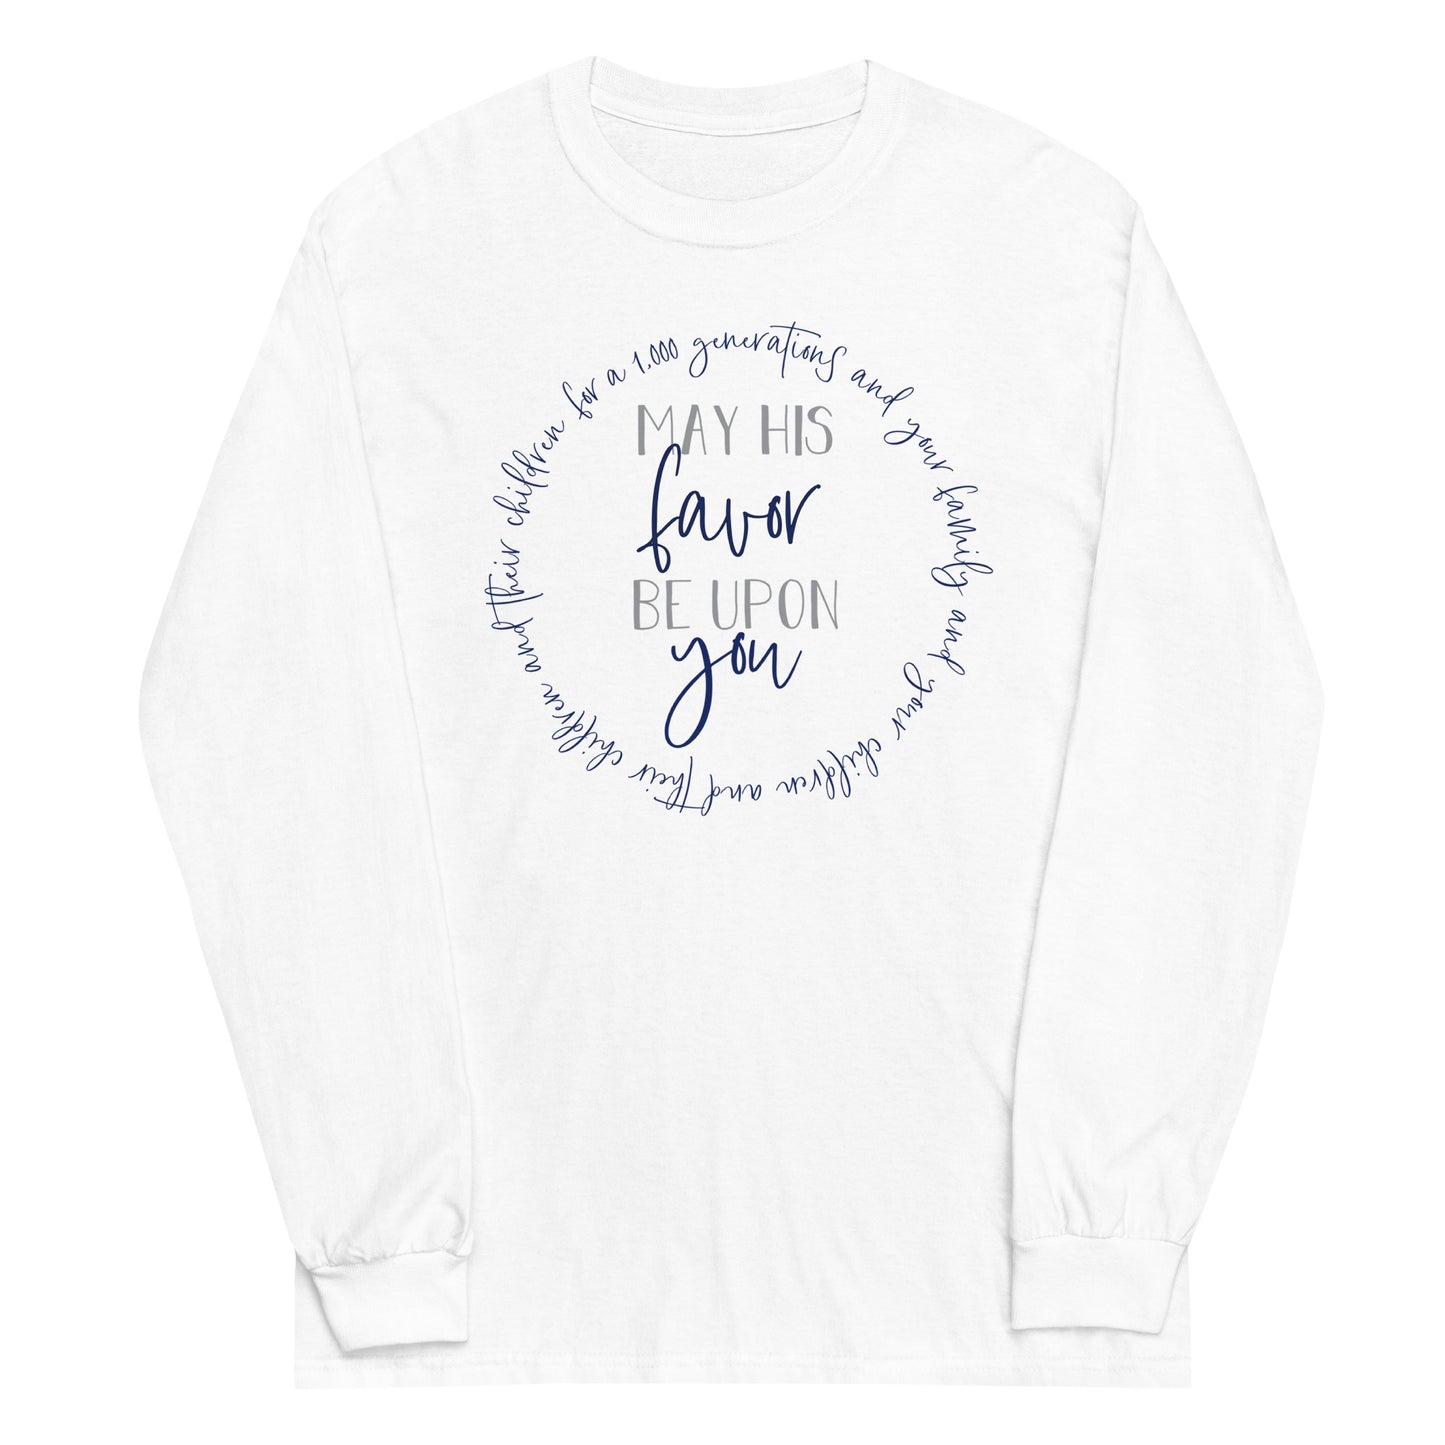 May His Favor Be Upon You Numbers 6 Blessing Christian aesthetic design printed in navy and gray on white soft long sleeve tee for women